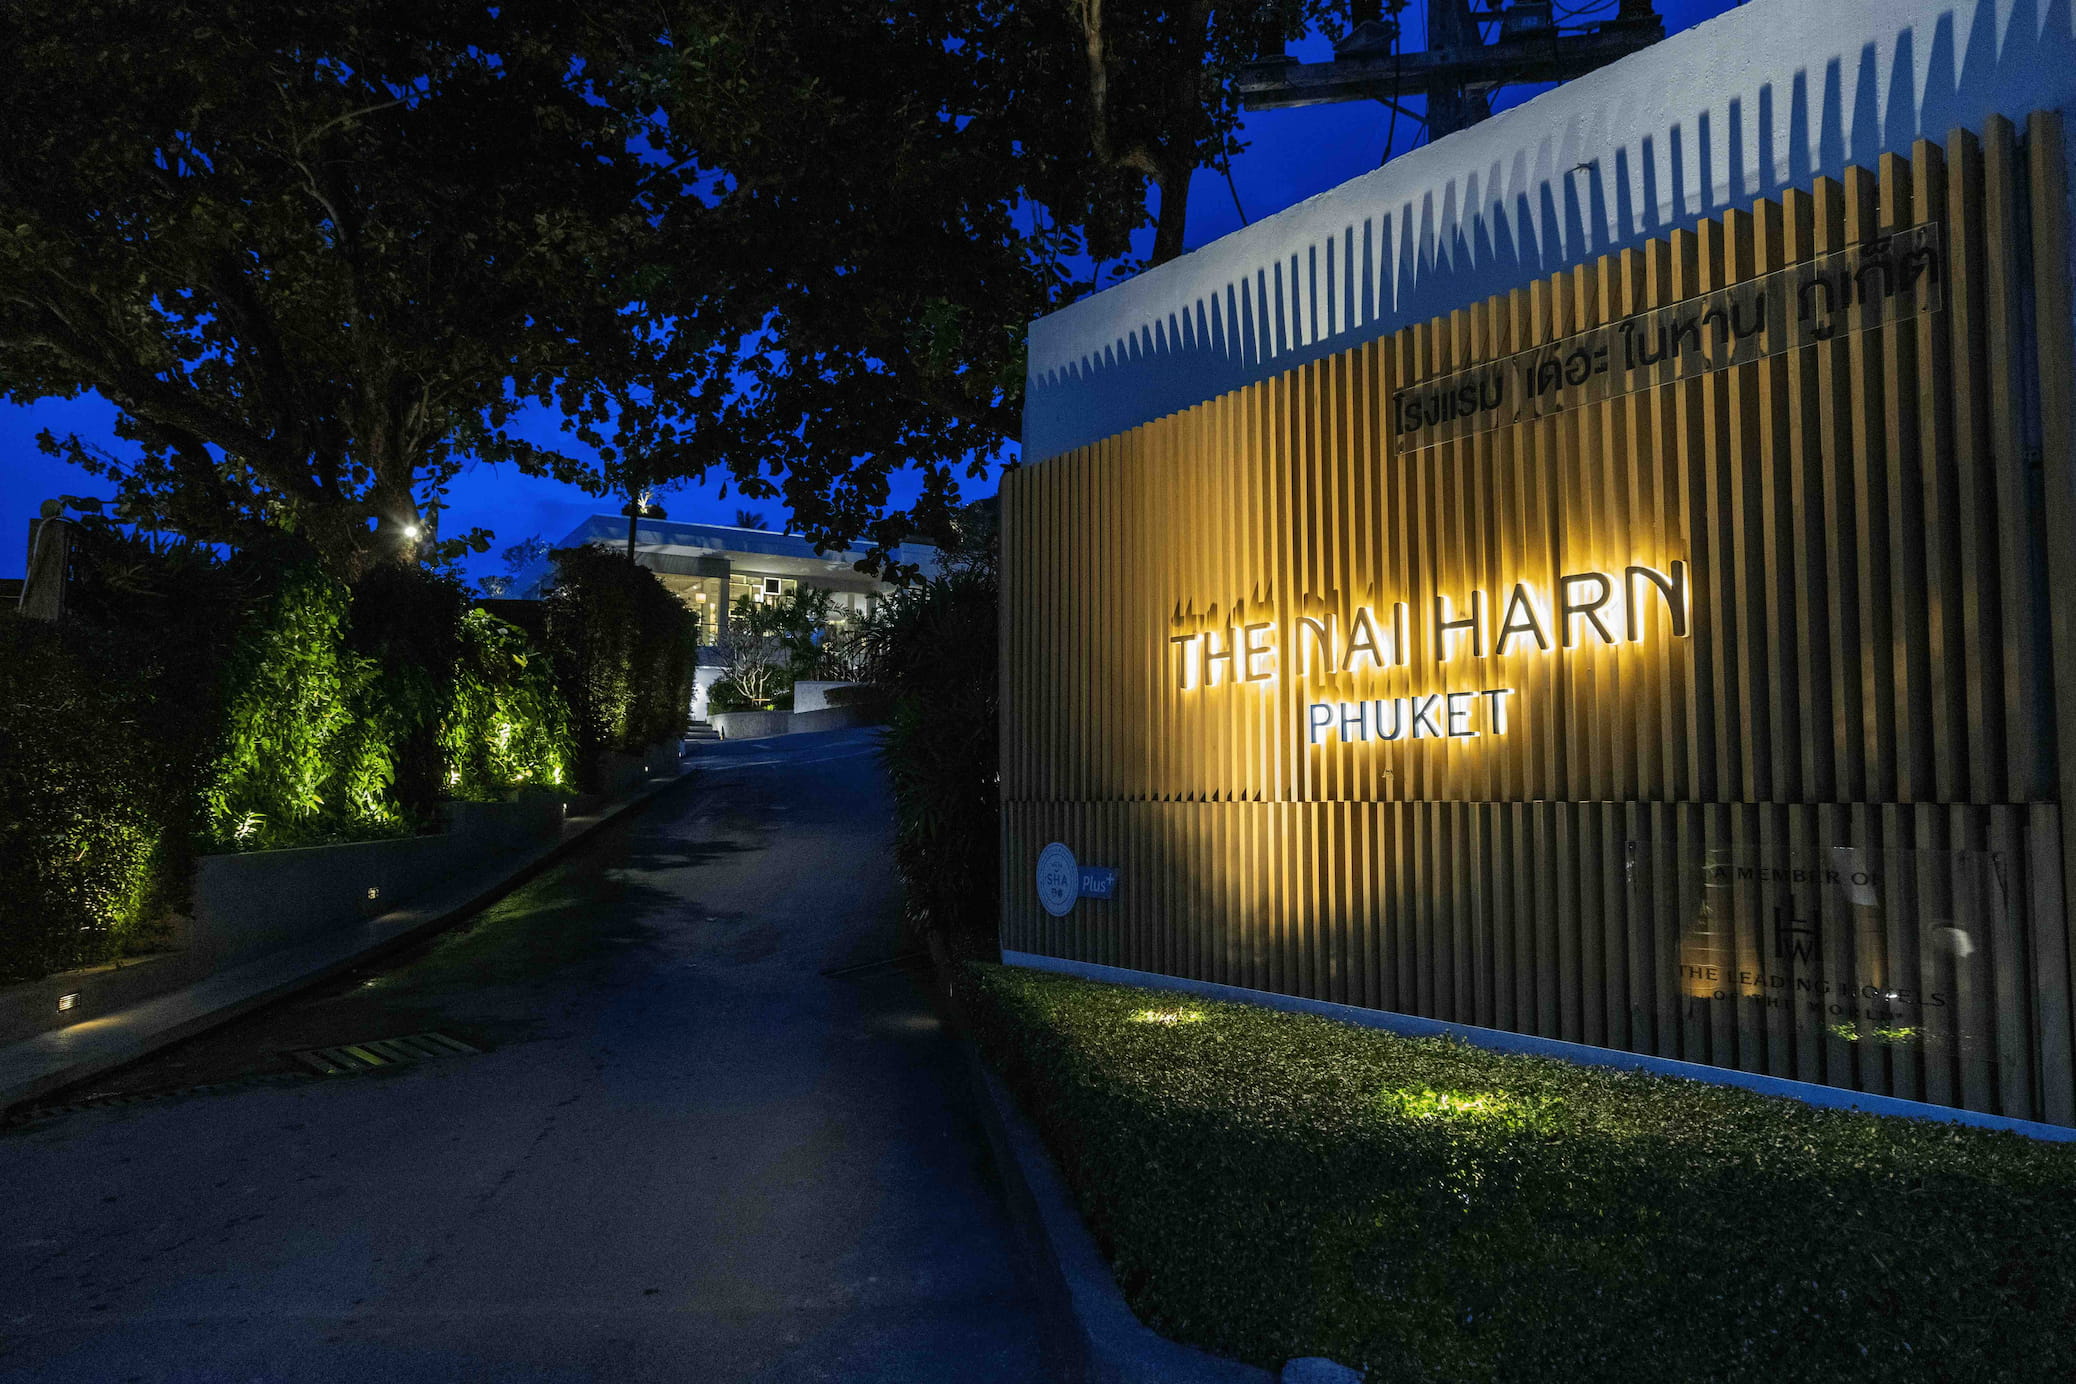 Entrance to the Nai Harn property at night. A lit sign on a leafy backdrop reads: The Nai Harn - Phuket.